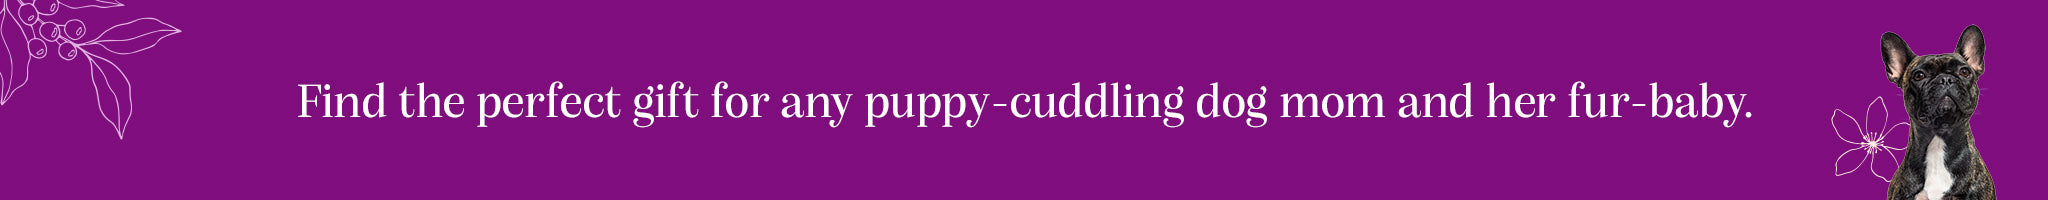 Find the perfect gift for any puppy-cuddling dog mom and her fur-baby.